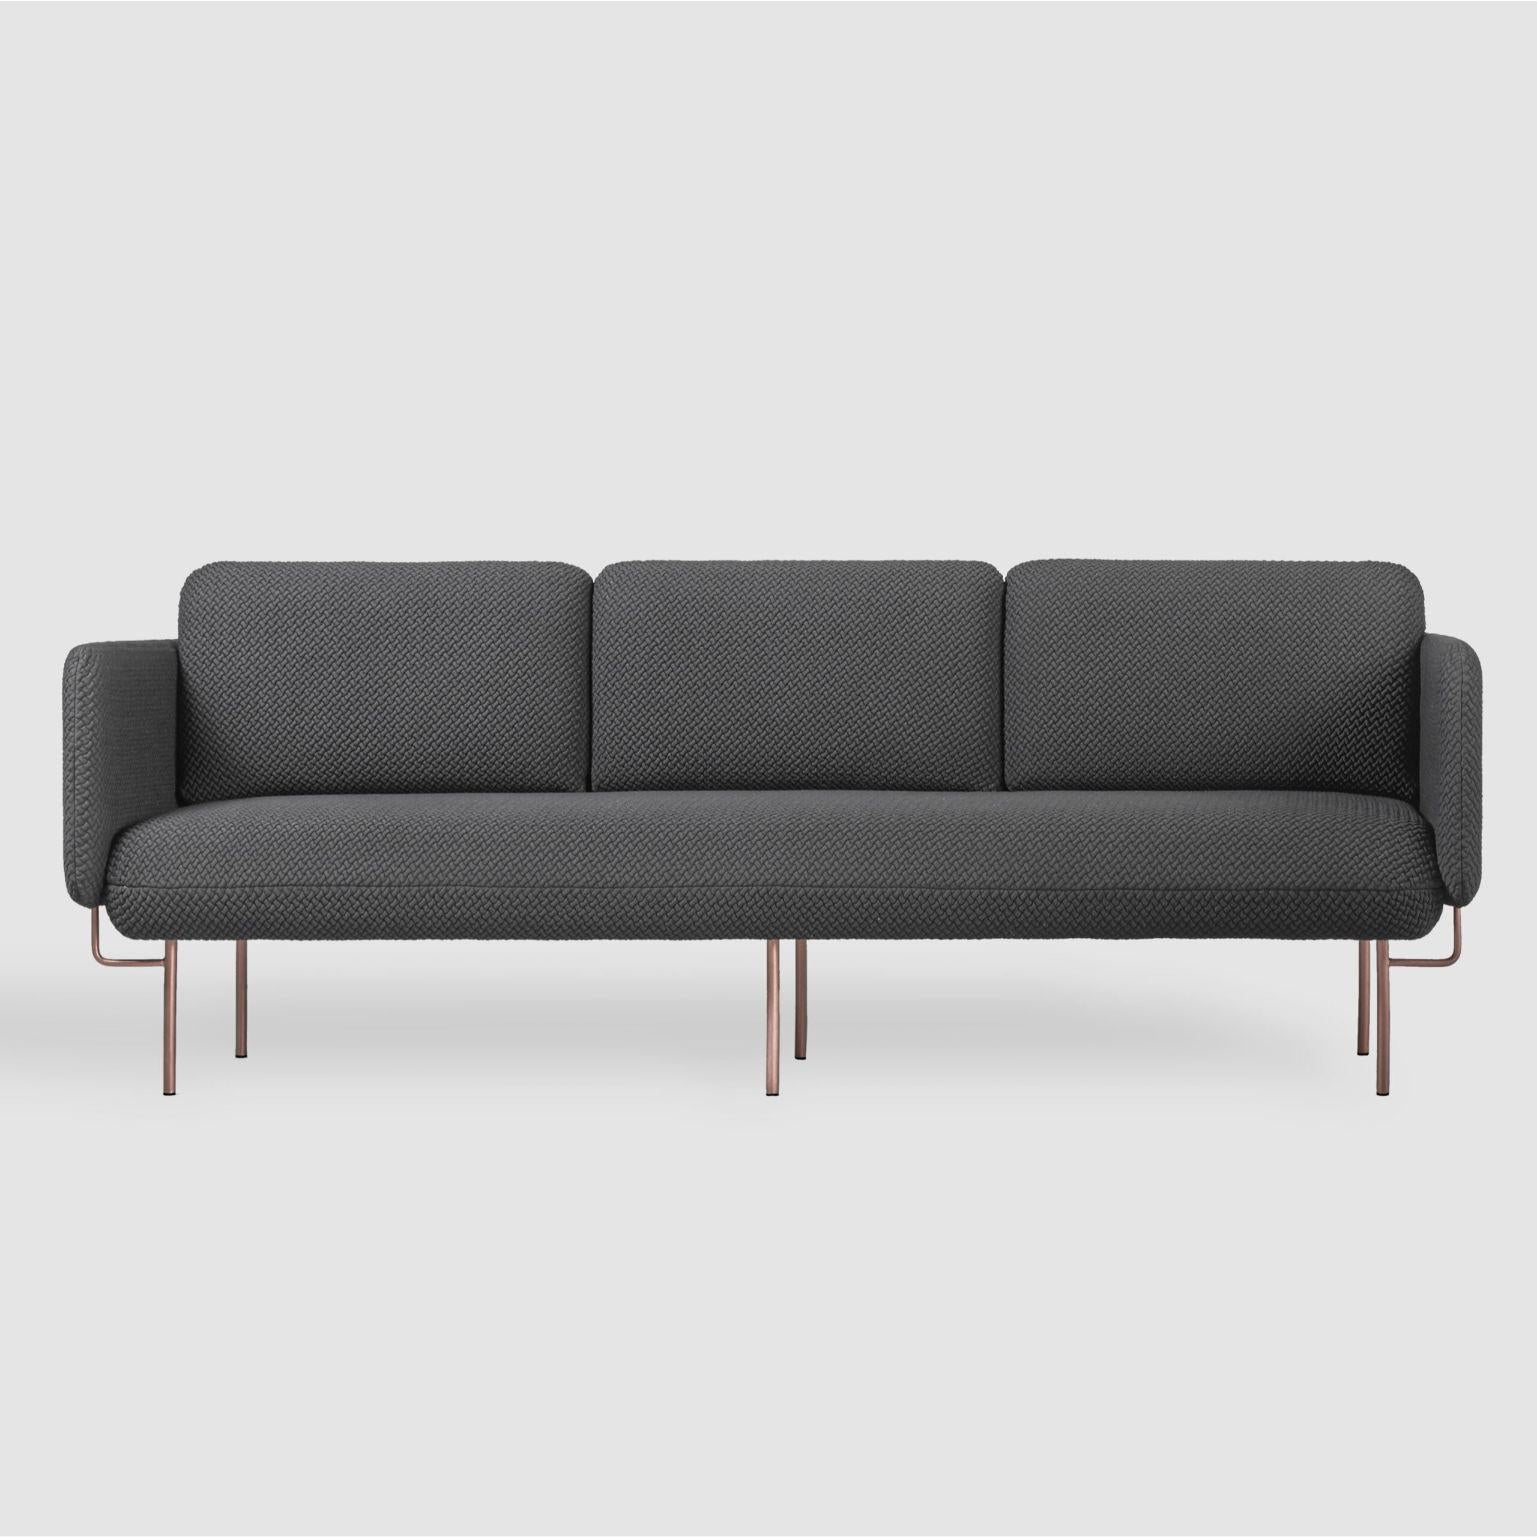 Pink alce sofa - large by Chris Hardy
Dimensions: W224, D88, H82, Seat45 (3 and a Half Seaters)
Materials: Iron structure and MDF board
Painted or chromed legs
Foam CMHR (high resilience and flame retardant) for all our cushion filling